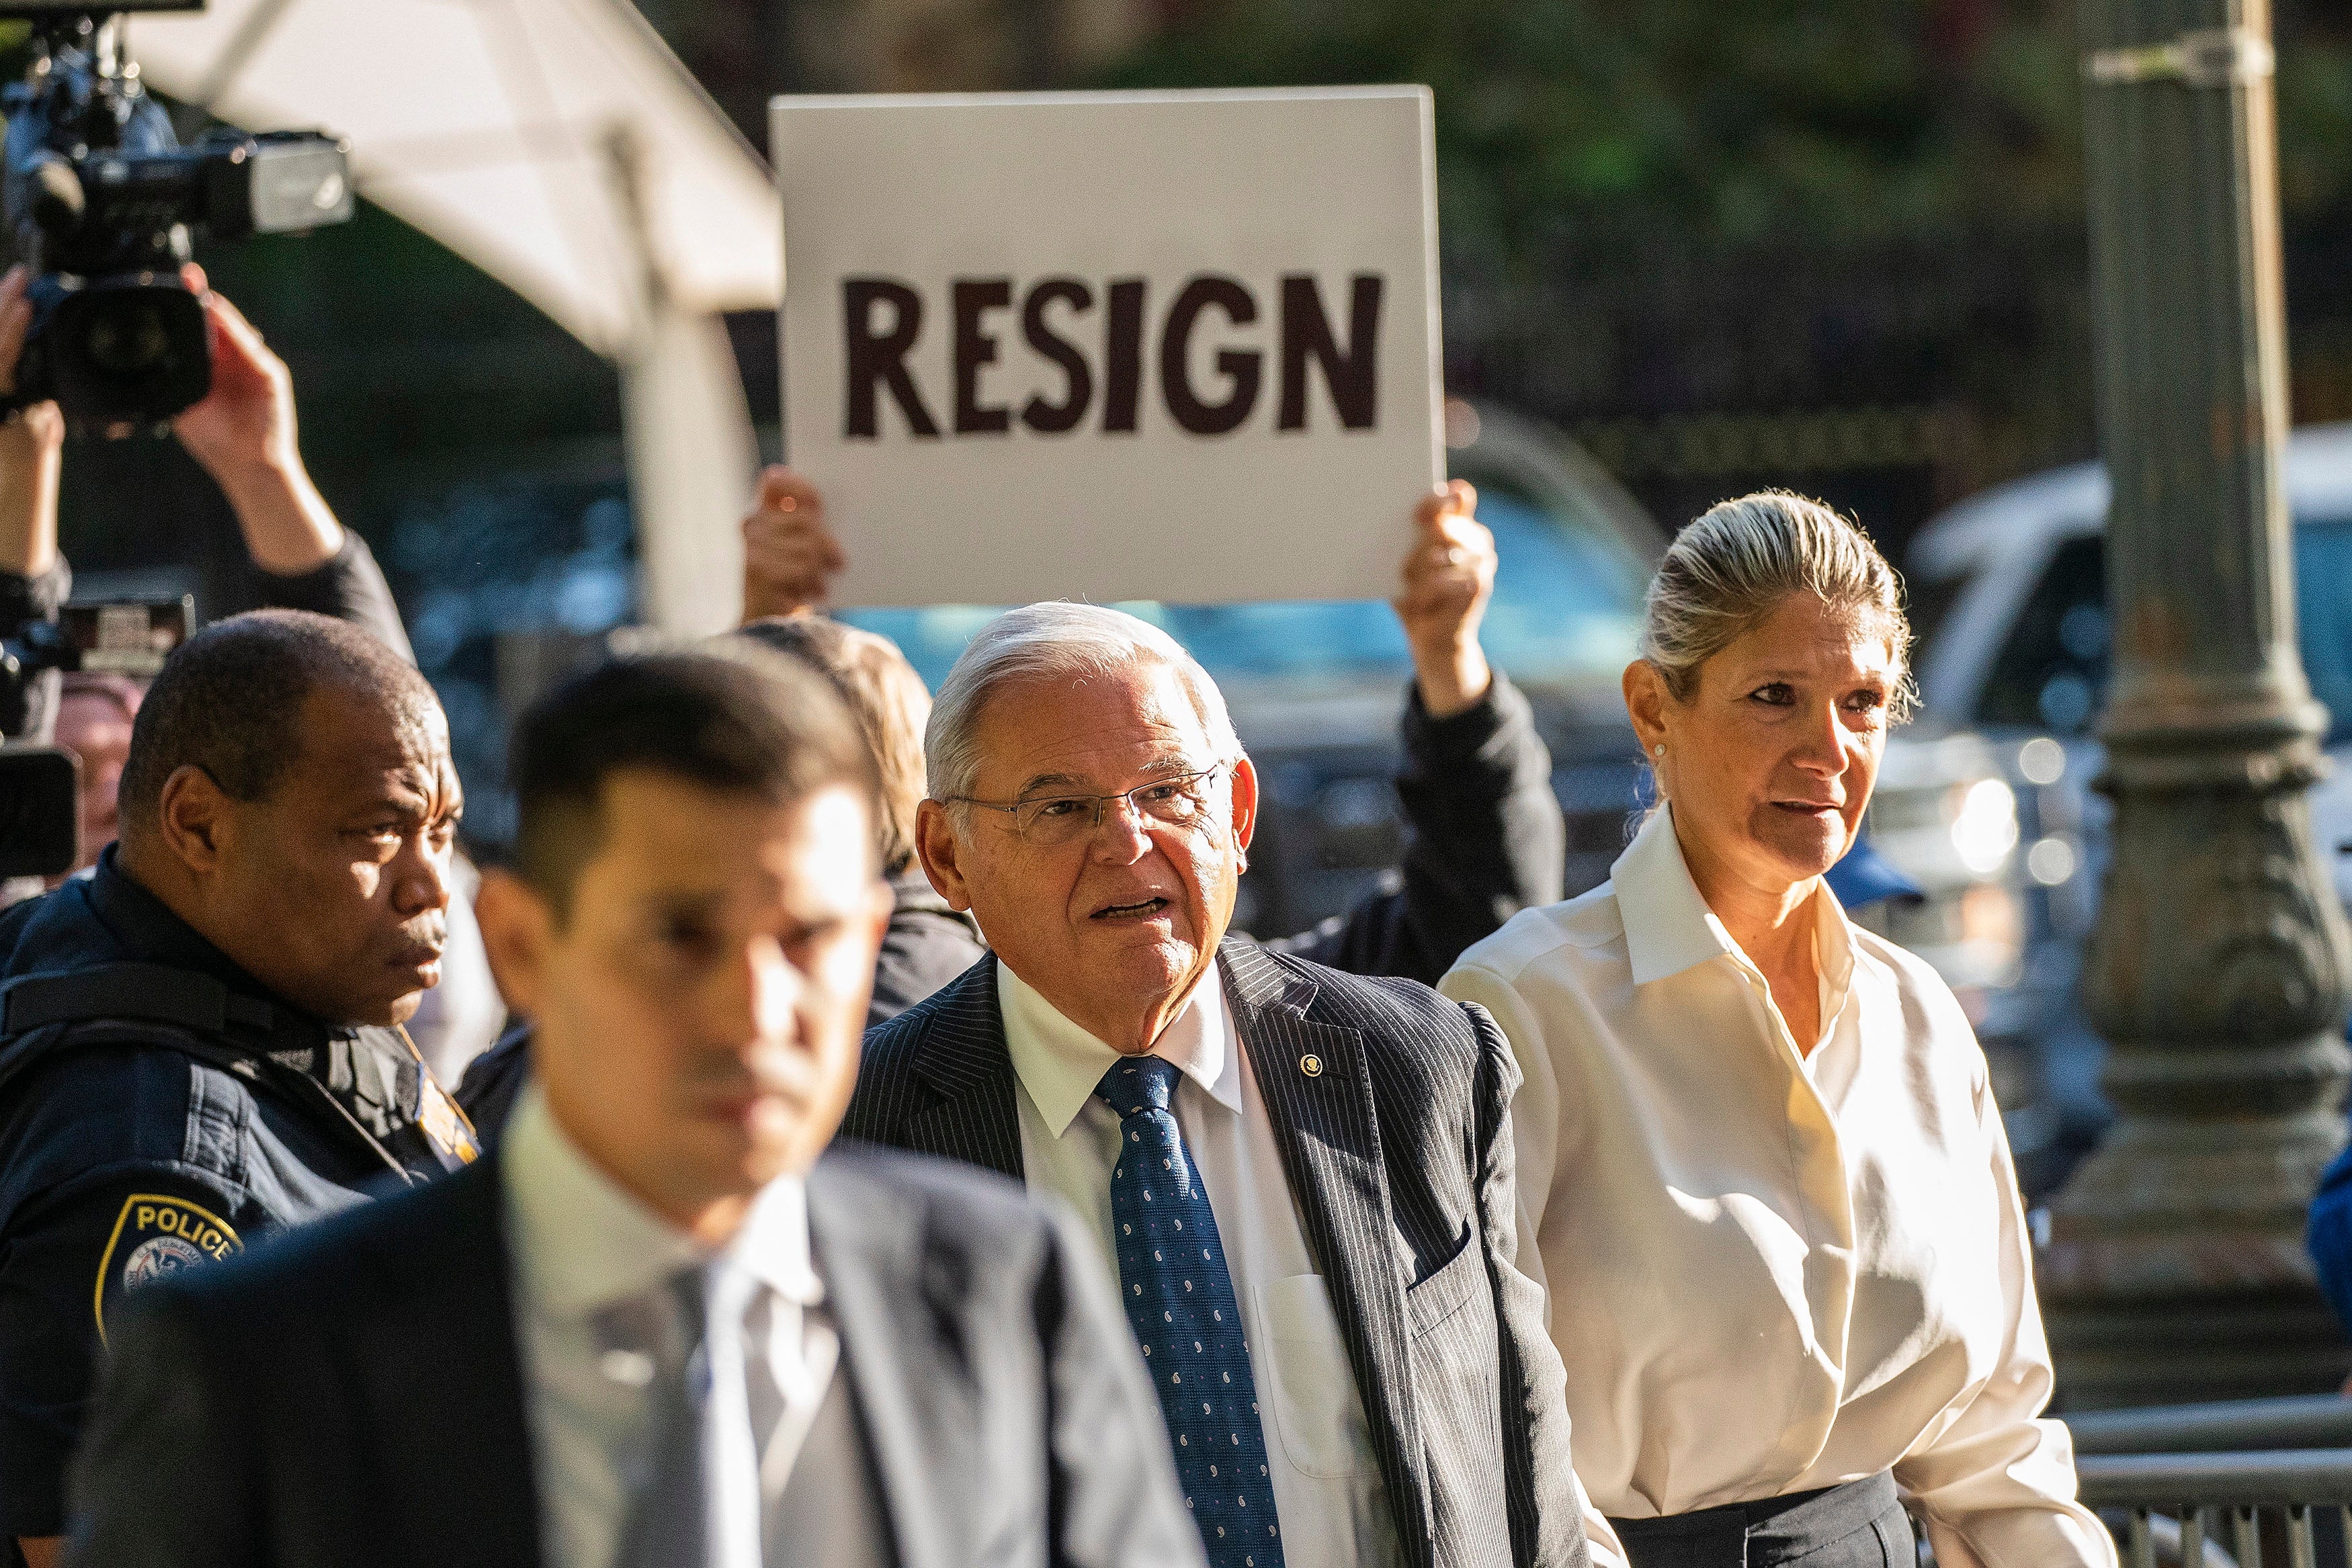 A protester holds a sign calling for US Senator Robert Menendez to resign as he enters federal court in New York City on 27 September.